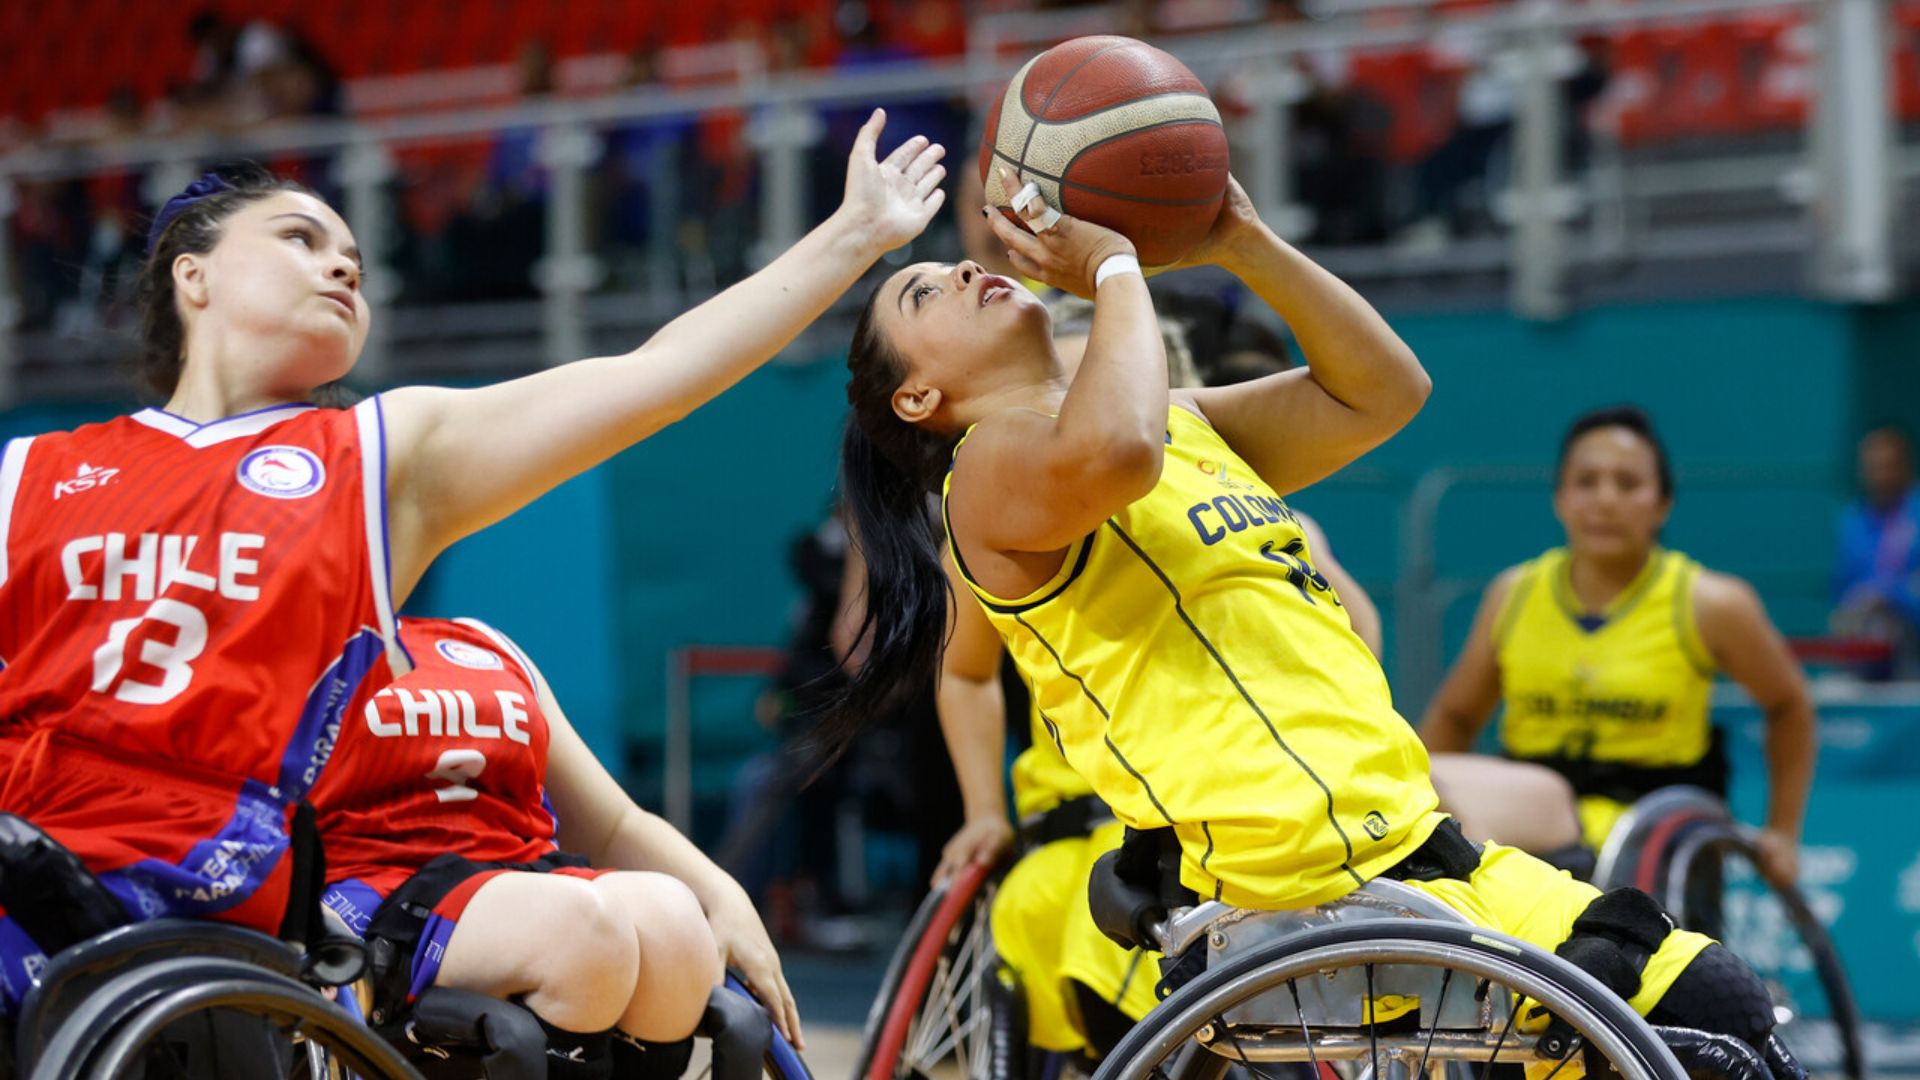 Colombia Defeats Chile in Wheelchair Basketball